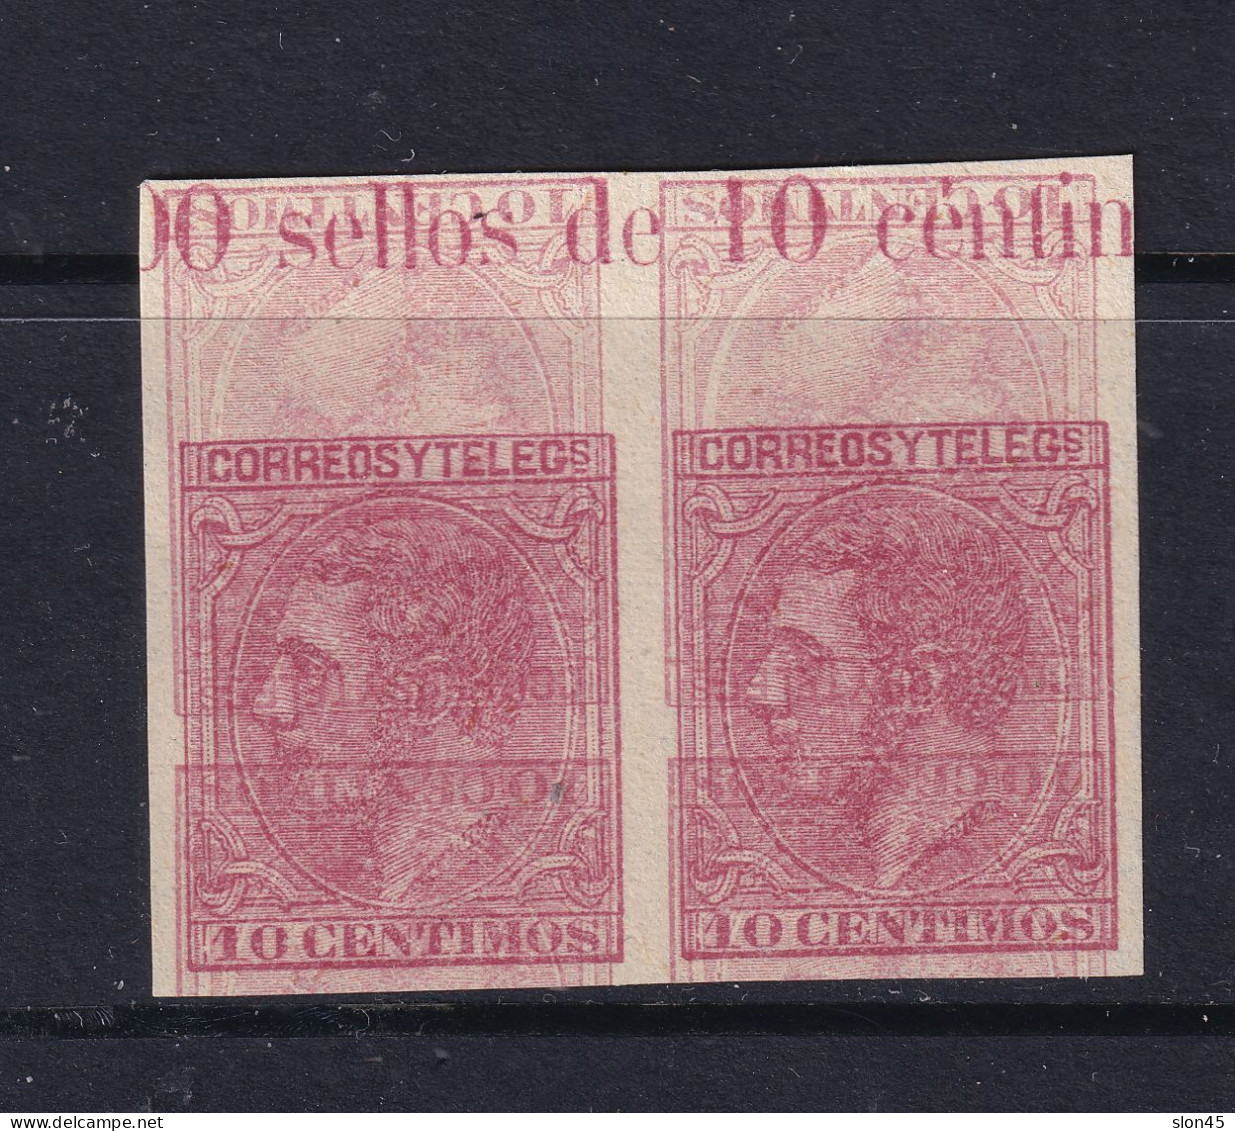 Spain 1879 1c Double Print  One Inverted Imperf MNG 16028 - Fouten Op Zegels